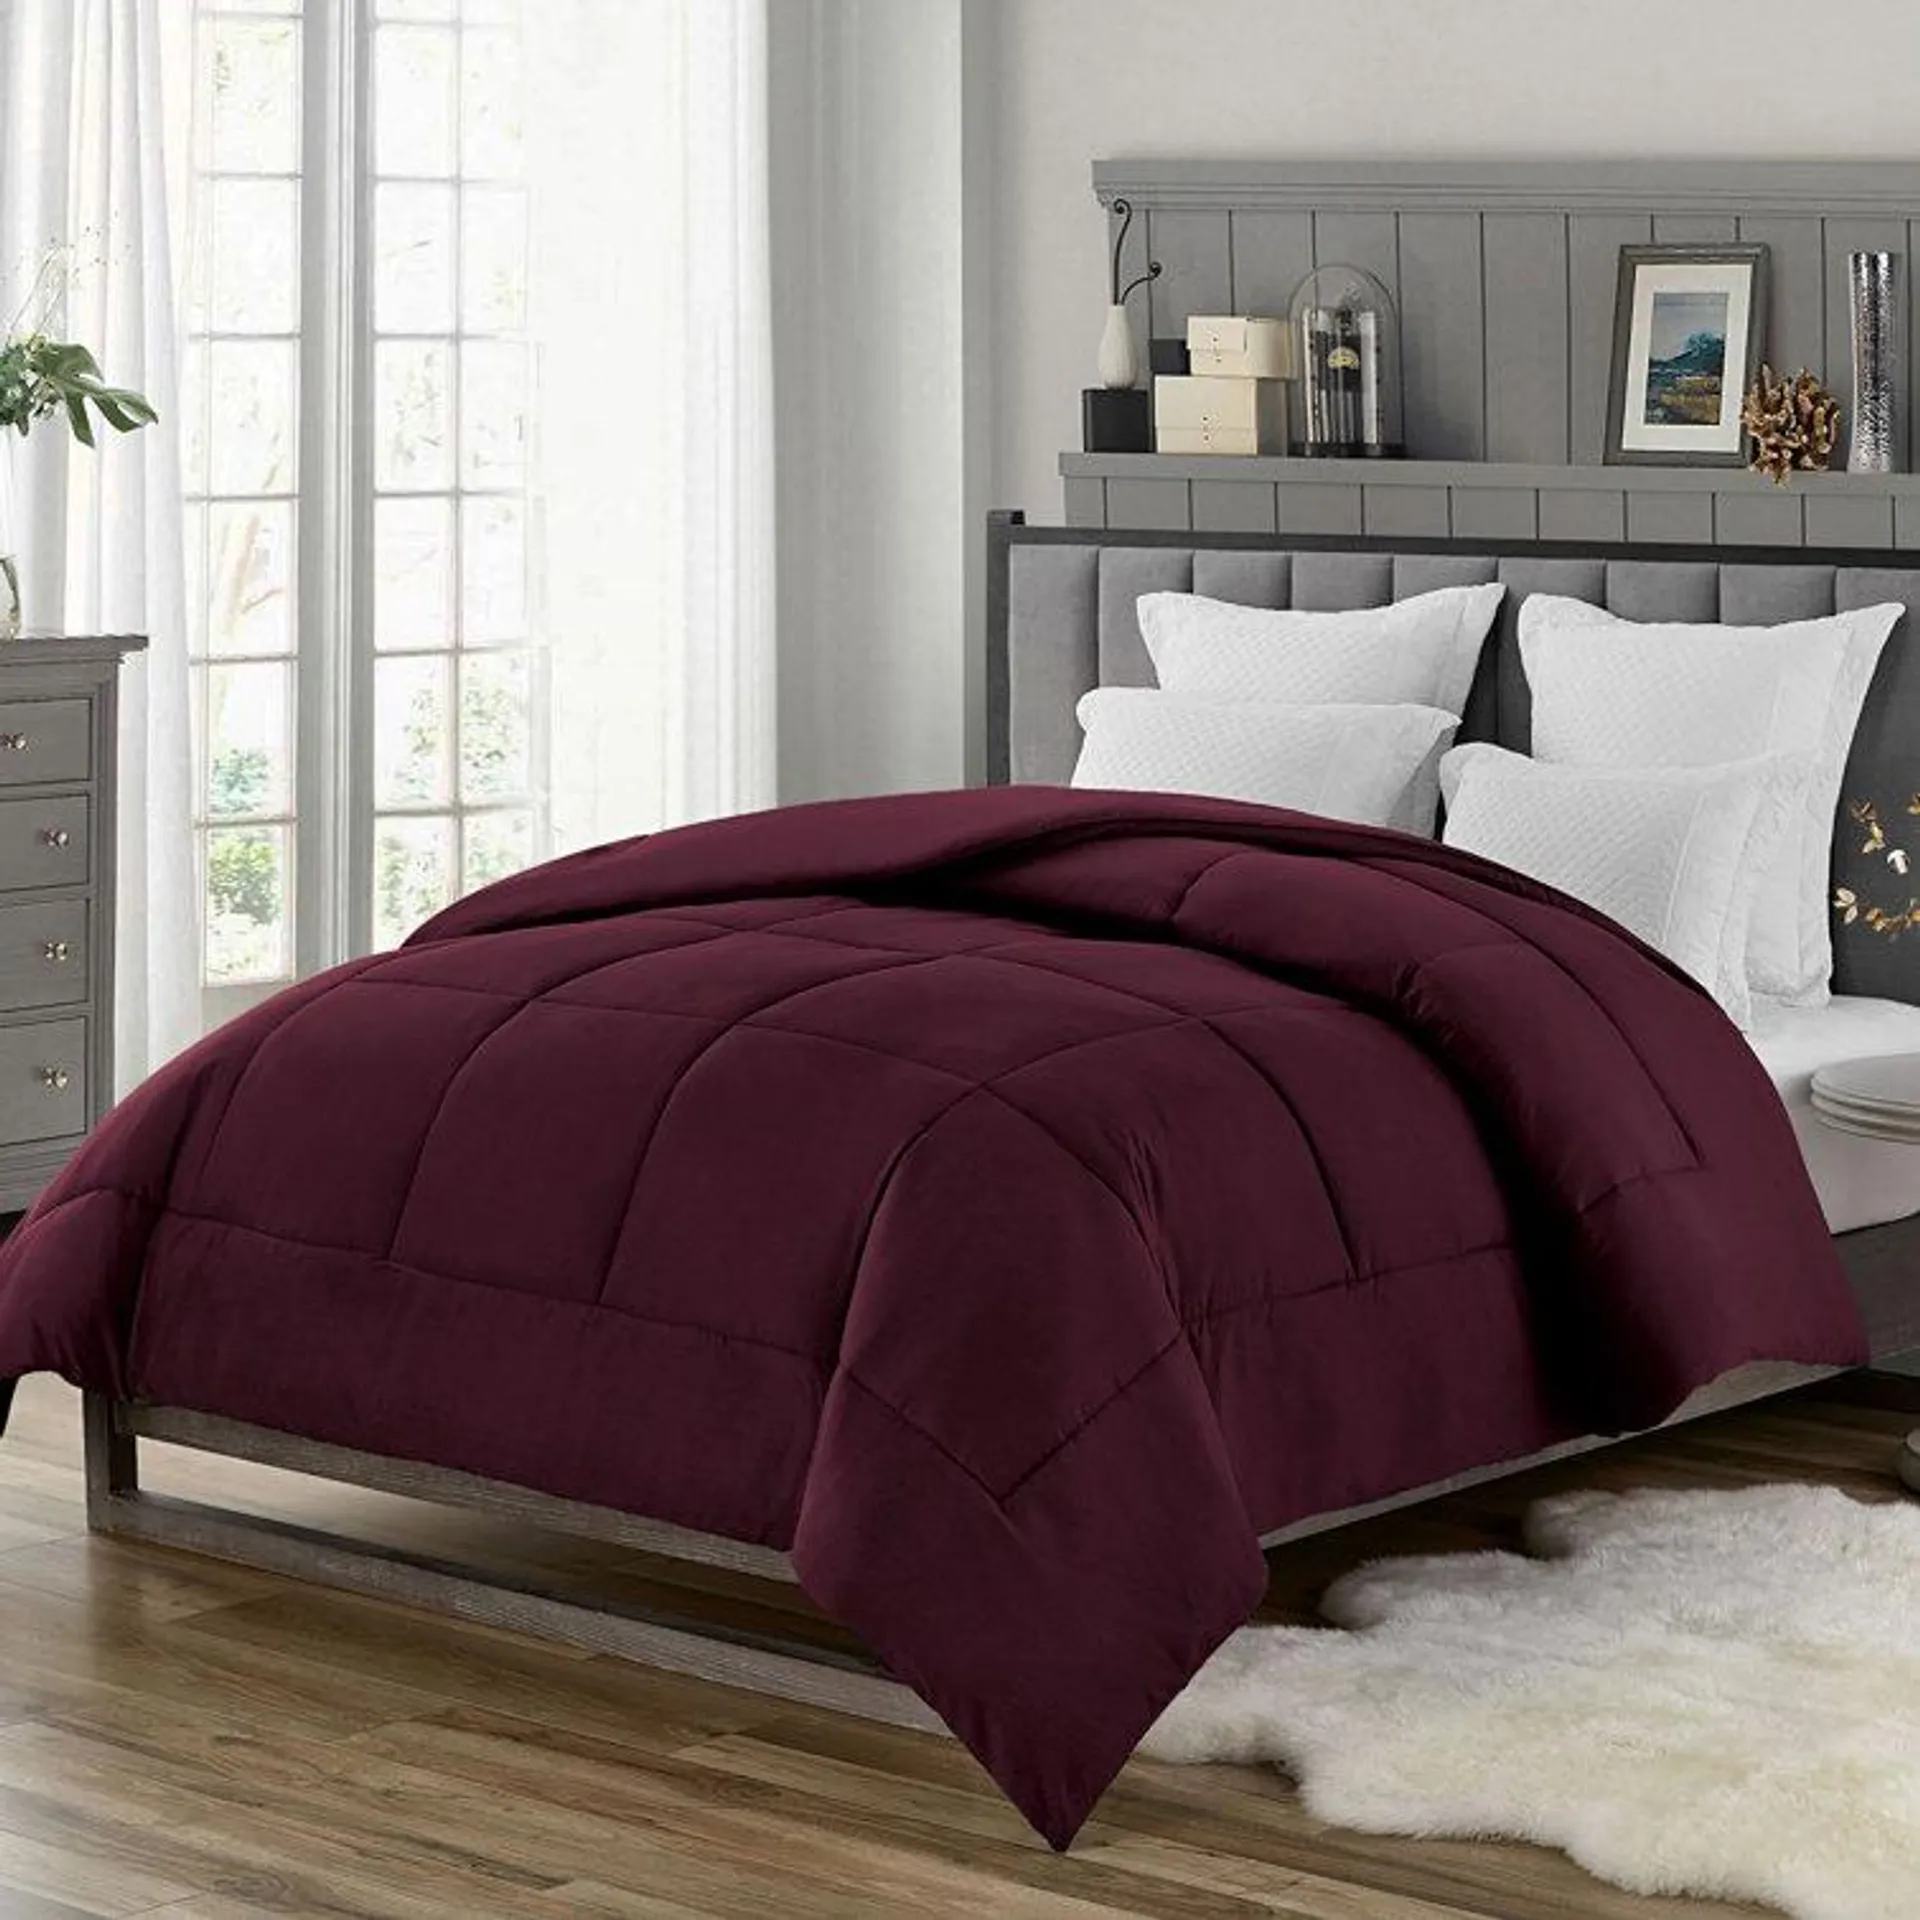 Saulean Traditional Solid Colour Comforter